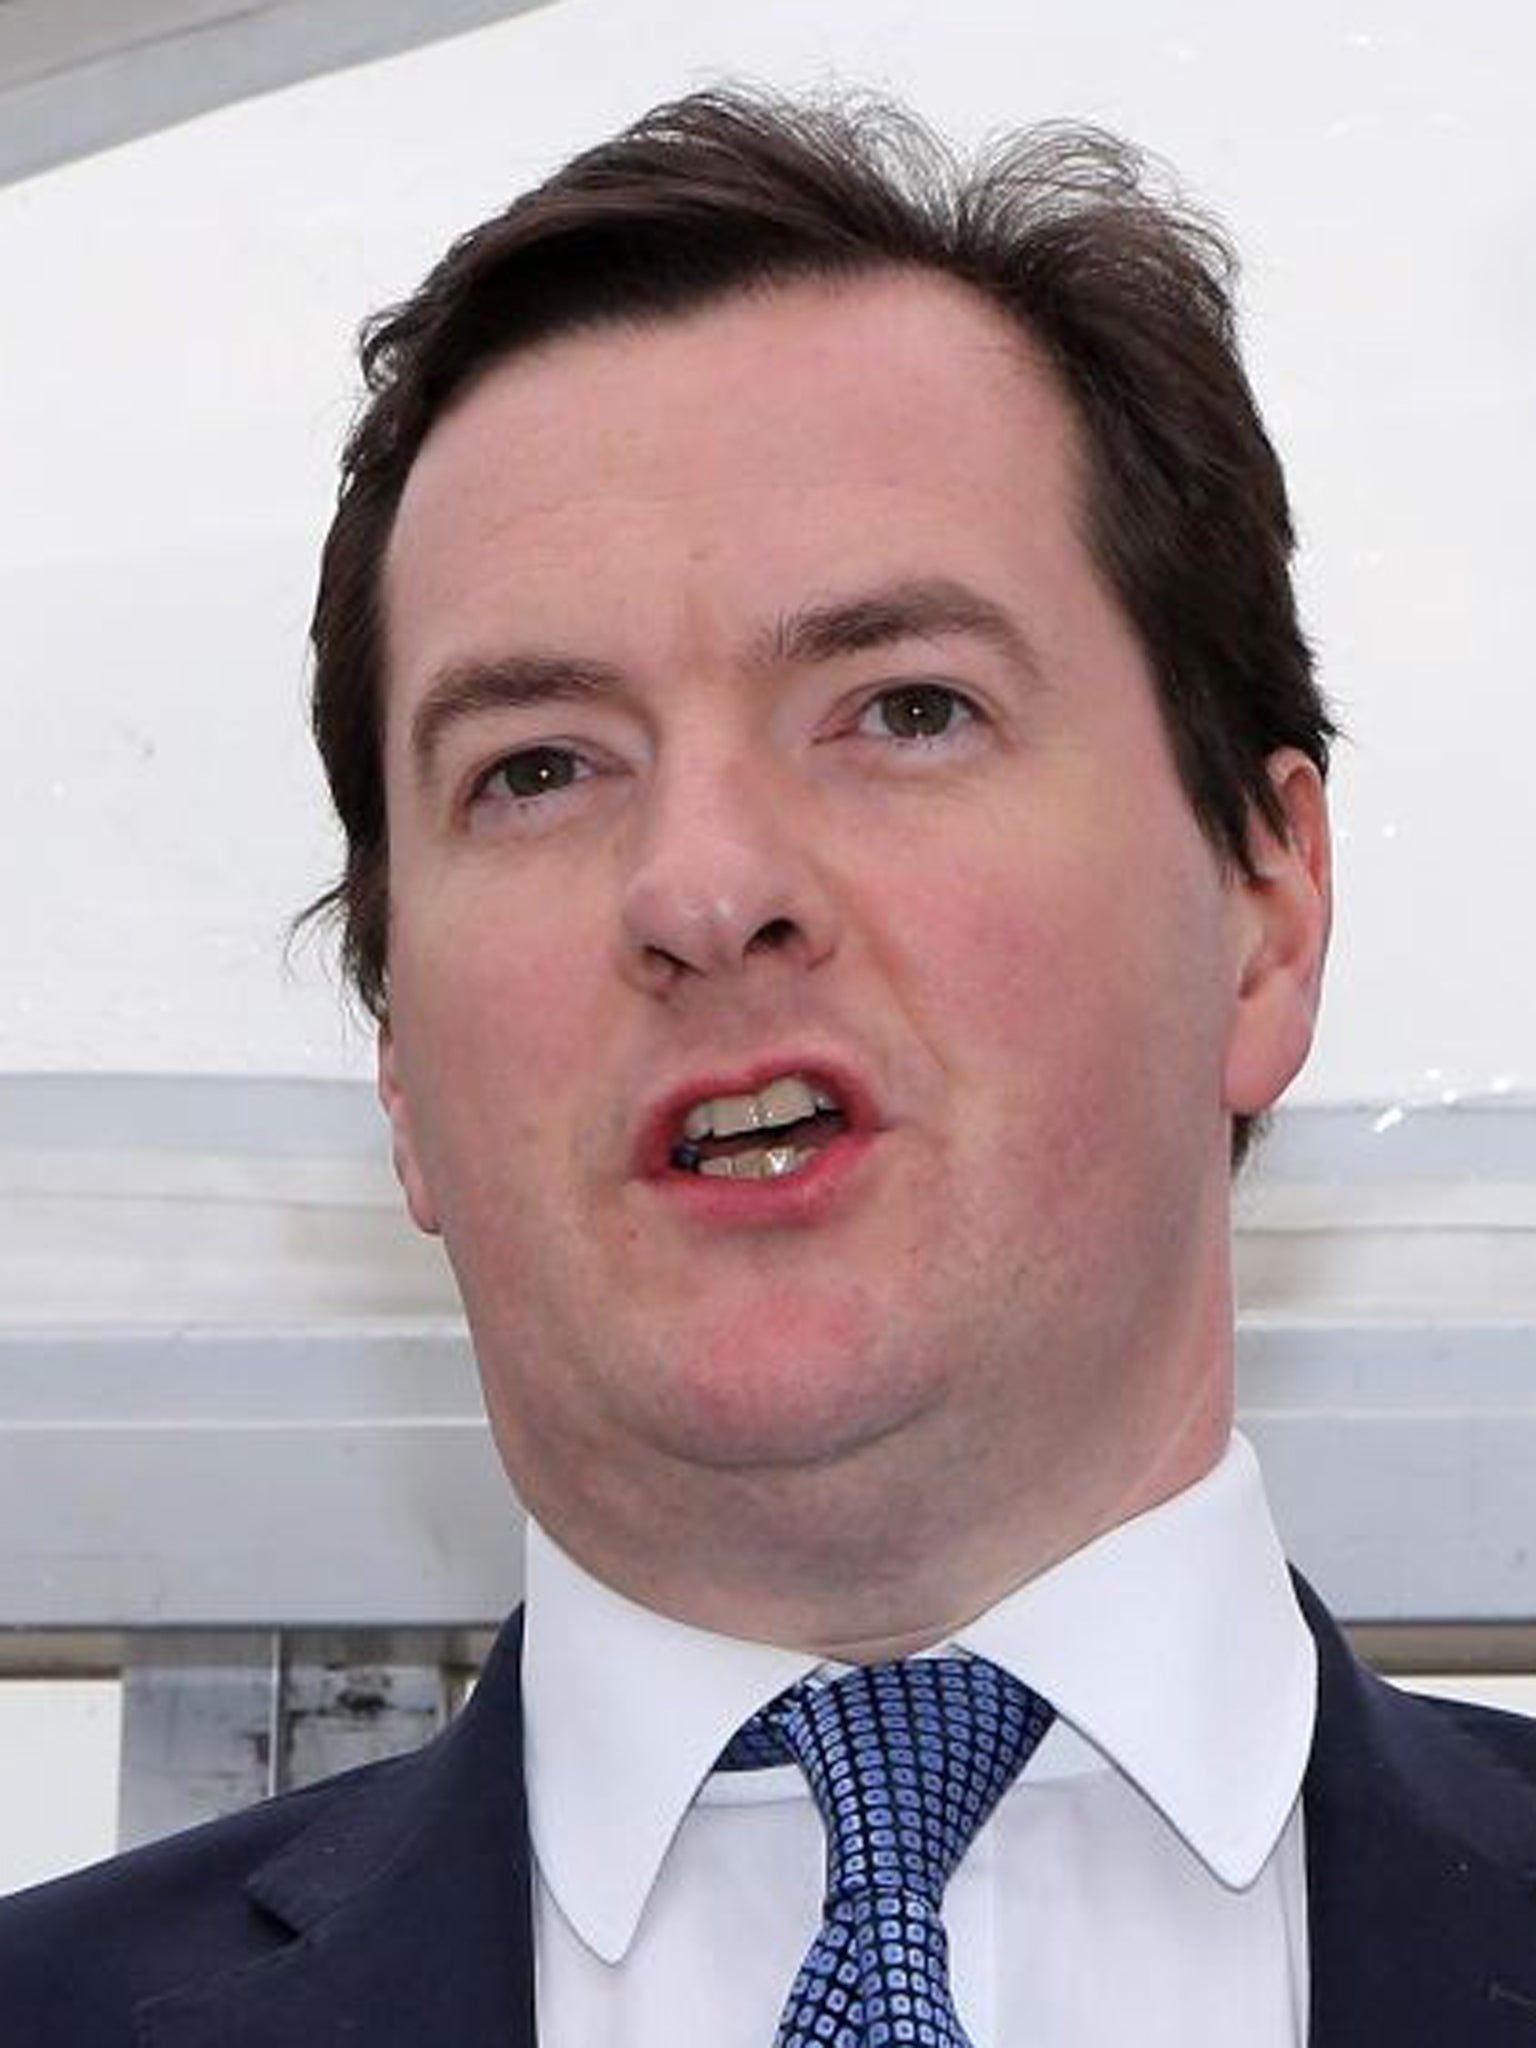 George Osborne set up the cross-party commission following the Libor scandal in an effort to shake-up the culture in British banks